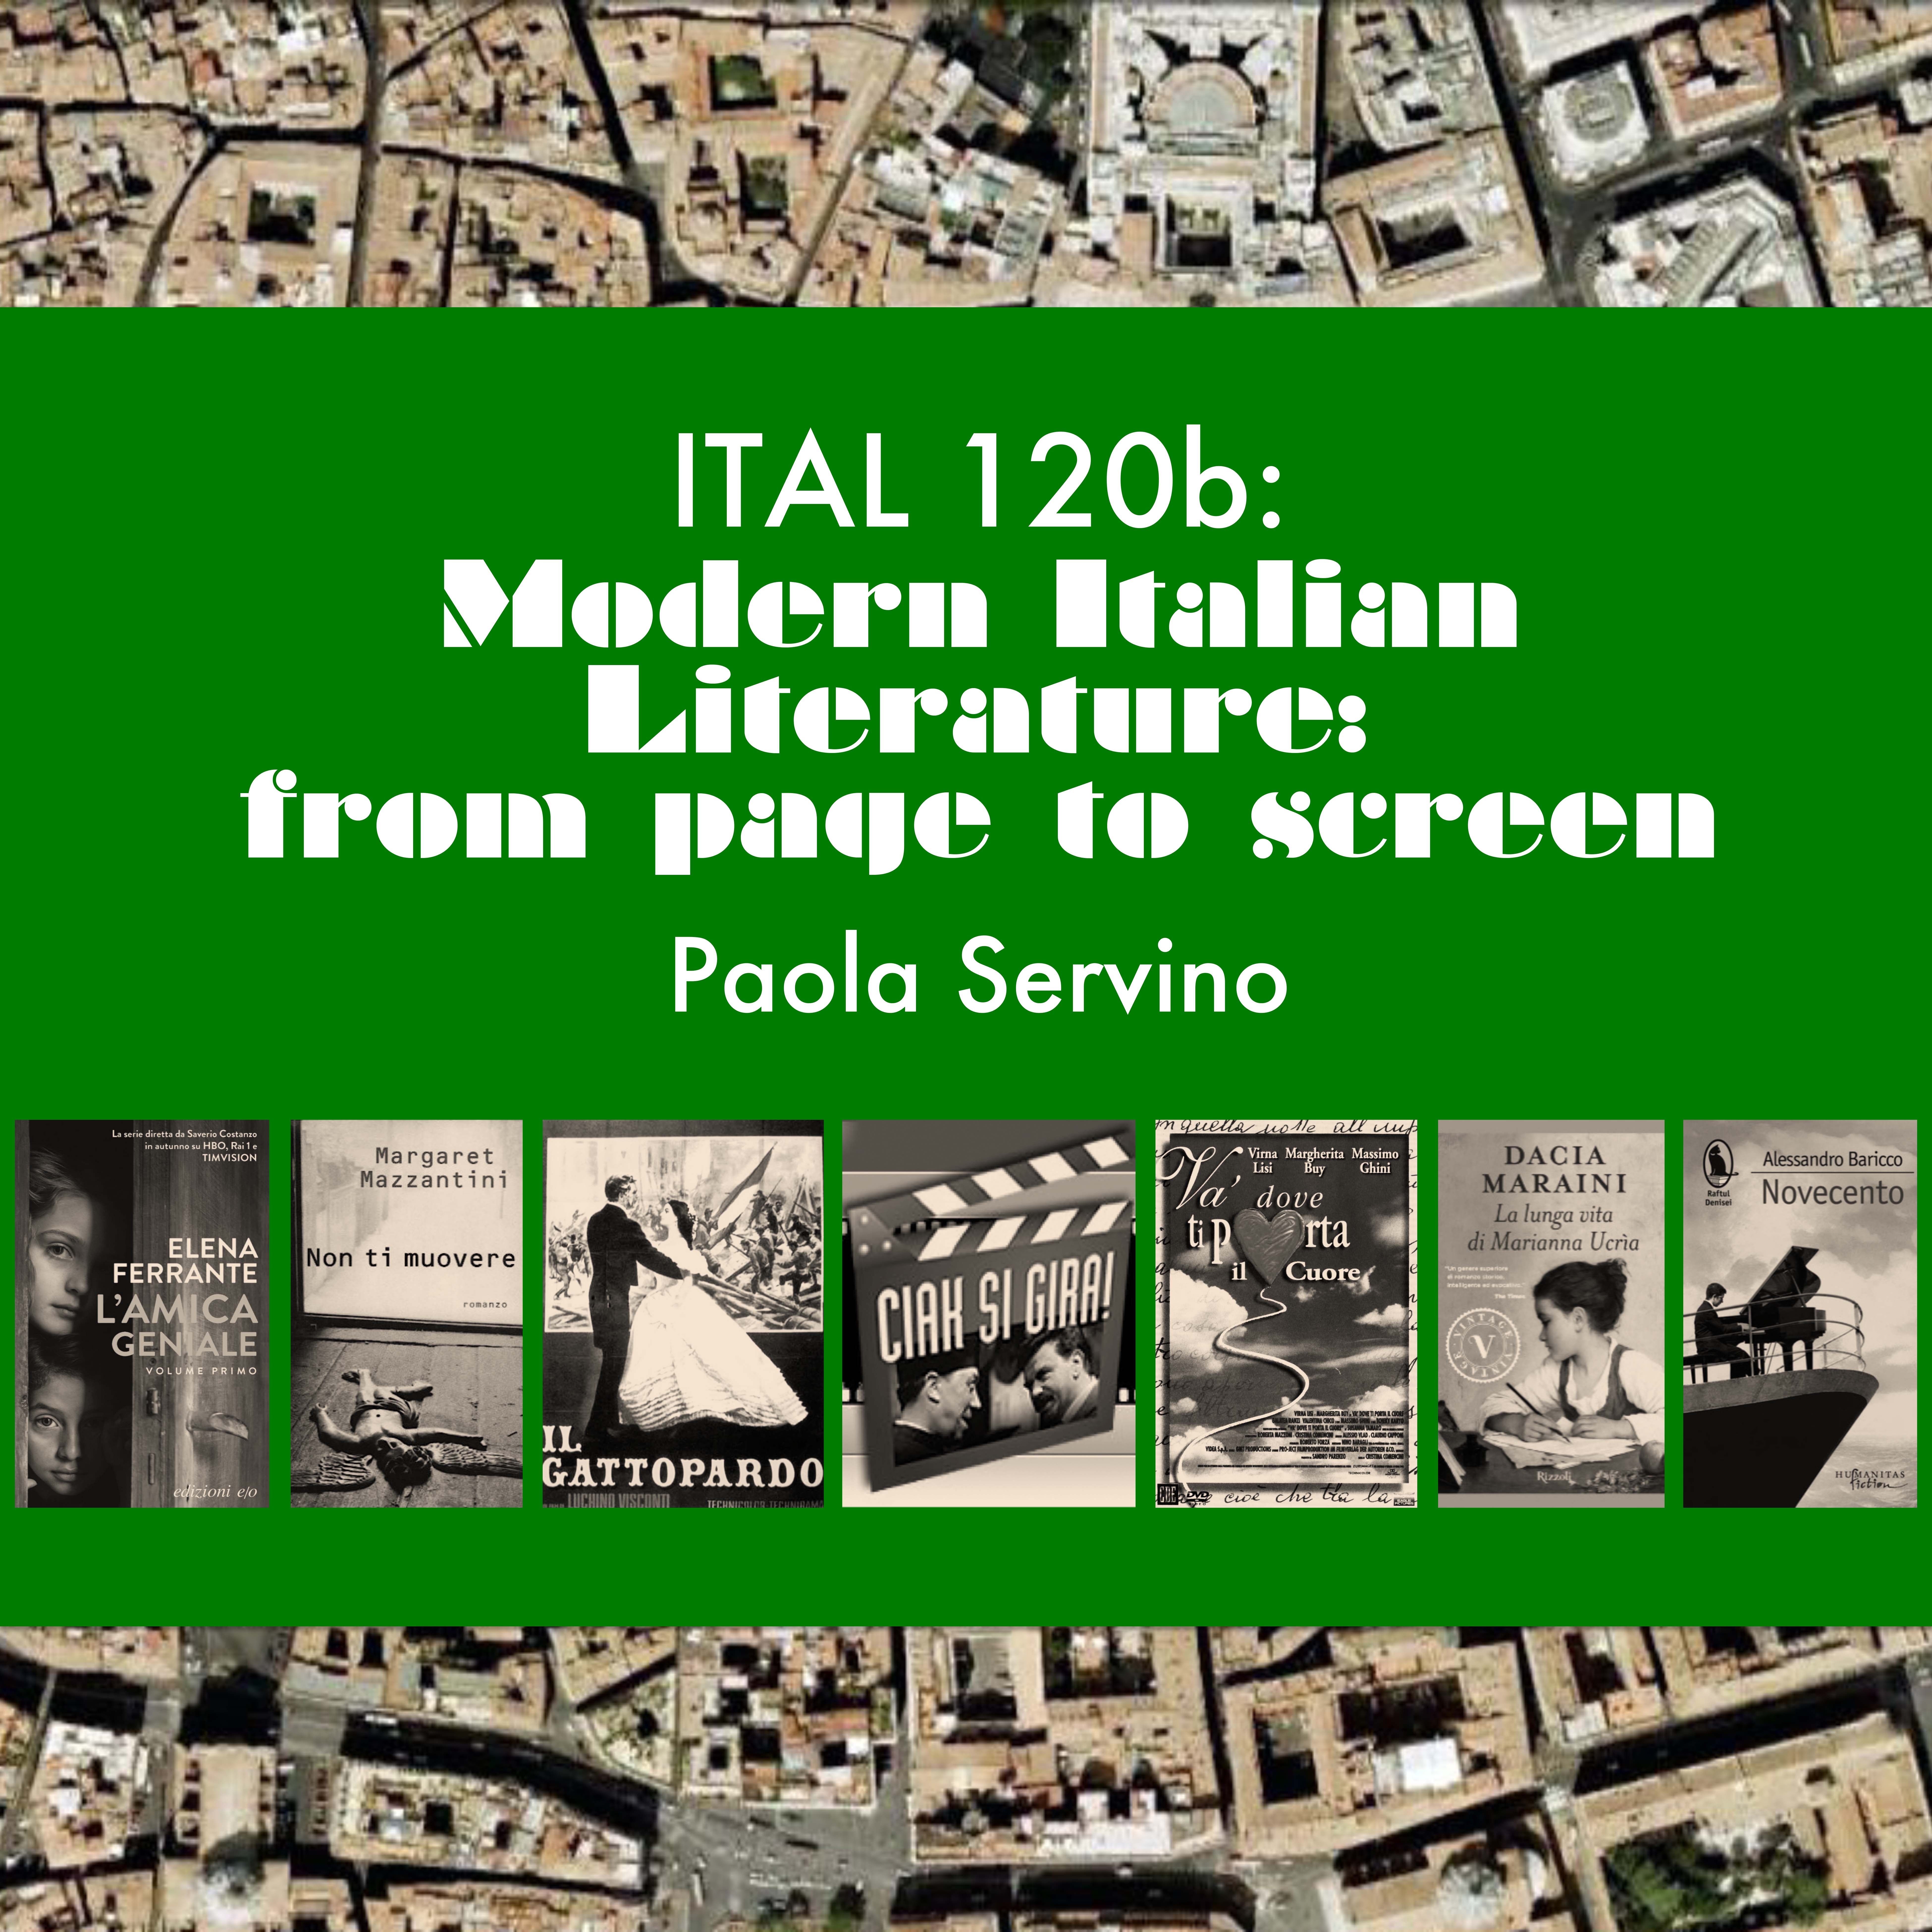 poster for ITAL 120